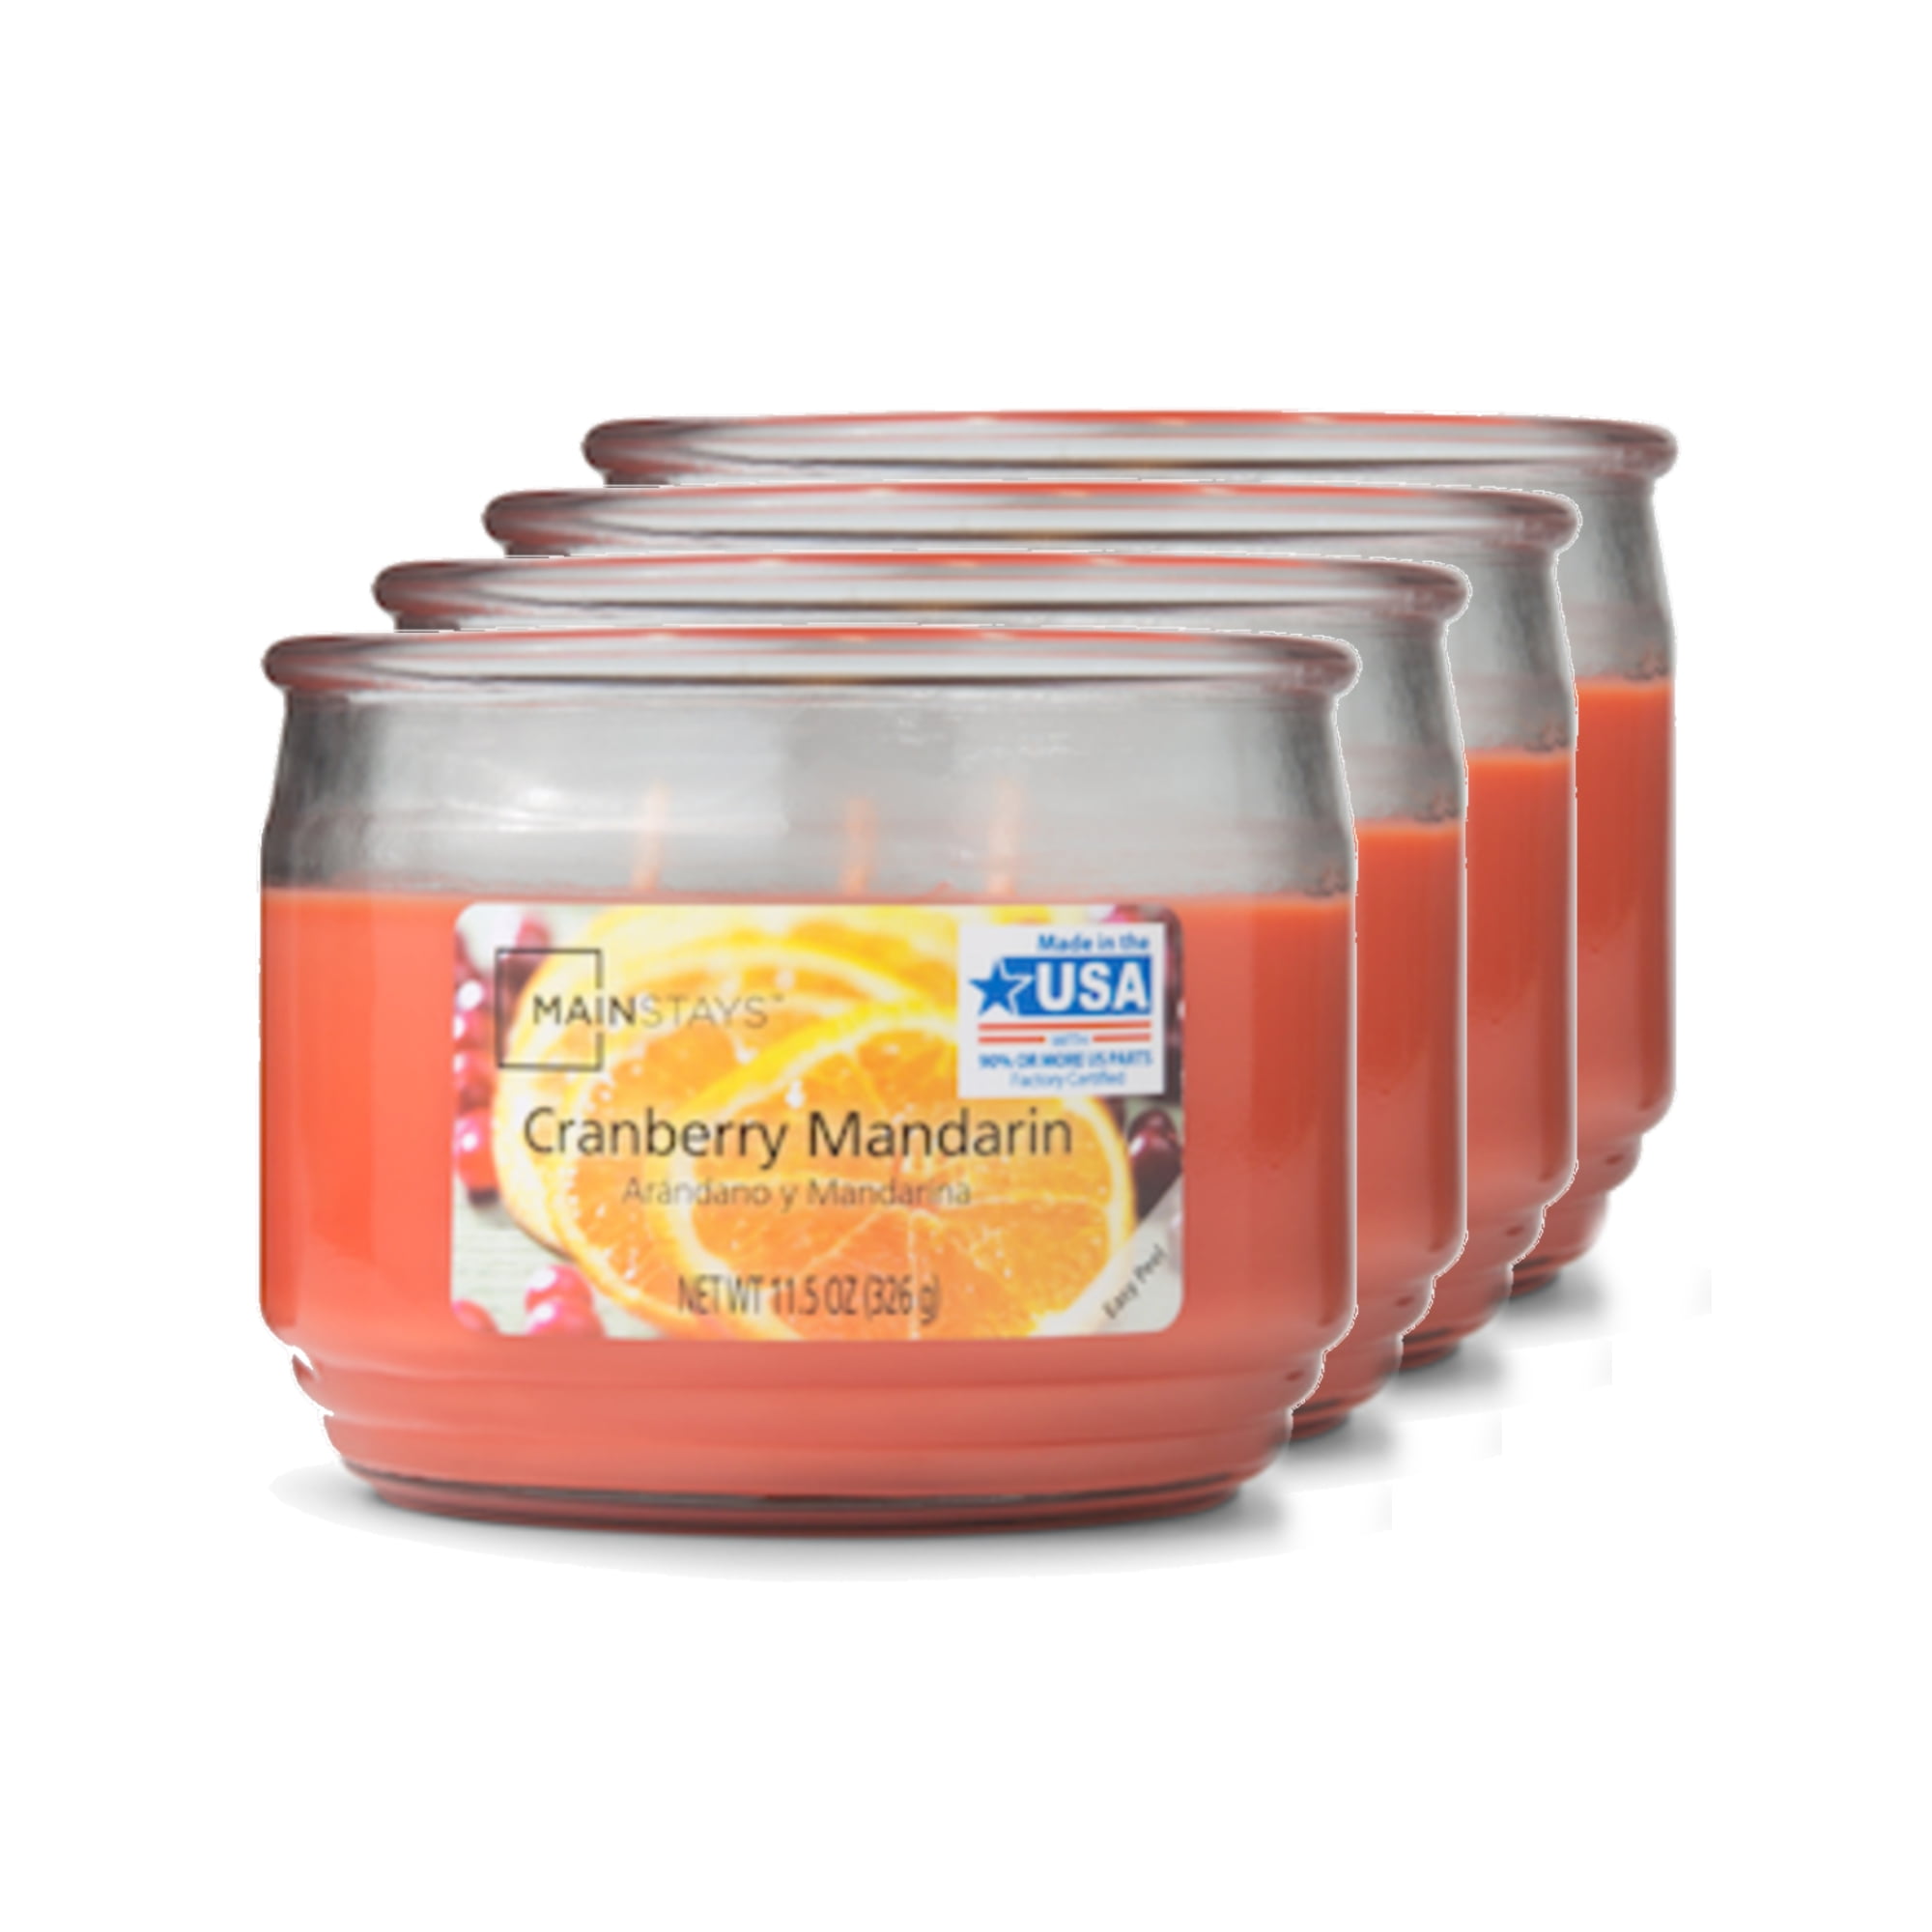 Free Shipping 2 Mainstays COZY GATHERING 3 Wick Jar Candles 11.5 oz each 